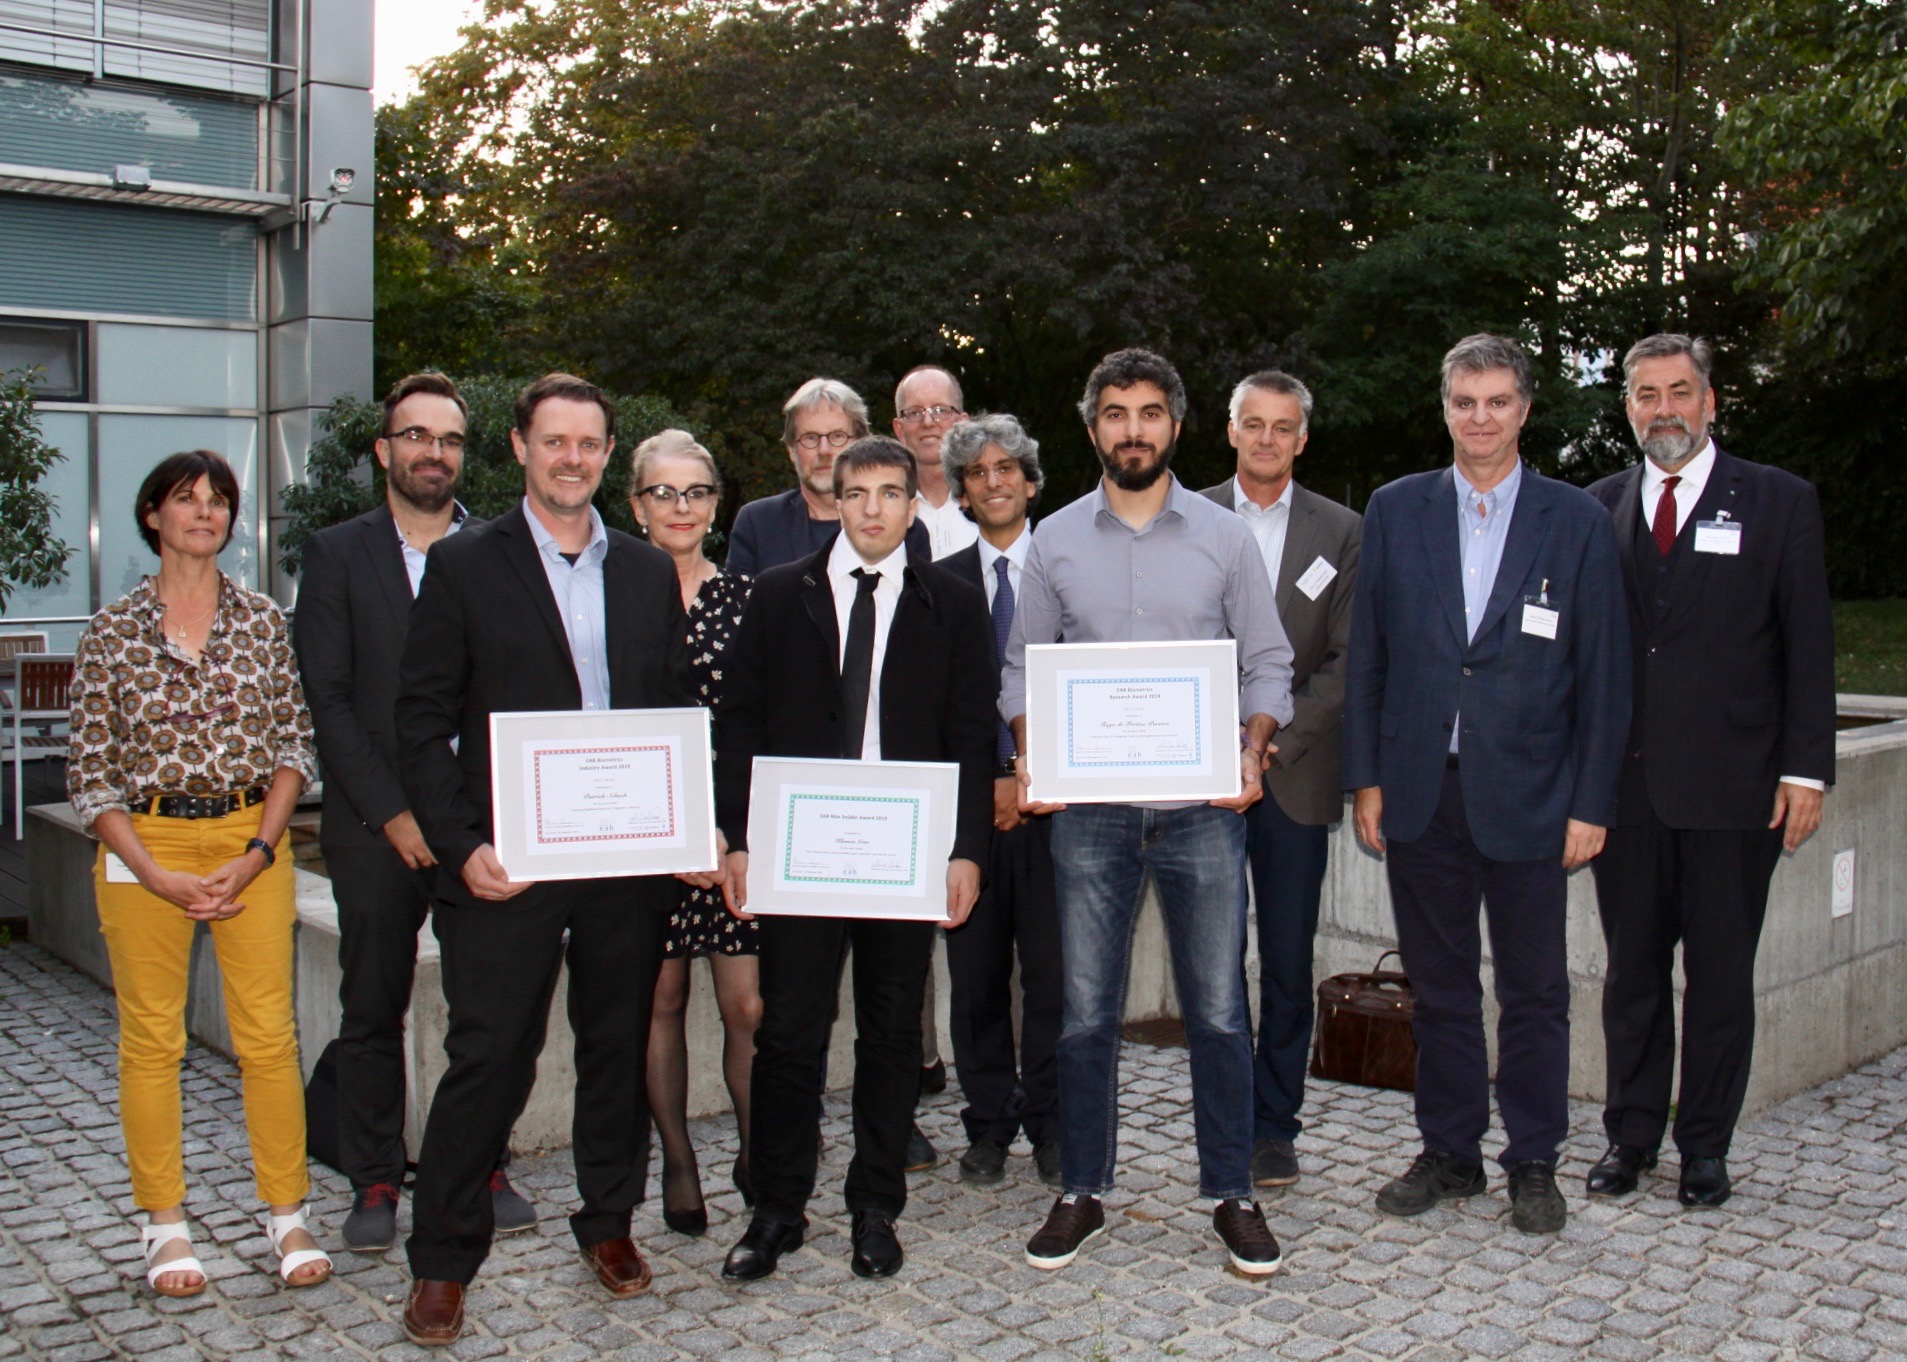 [Photo] The winners of the European Biometrics Max Snijder, Research, and Industry Awards 2019 Patrick Schuch, Klemen Grm and Tiago de Freitas Pereira together with Claude Bauzou (IDEMIA), Vitomir Struc (University of Ljubljana), Marianne Volonte (mymarc), Raymond Veldhuis (University of Twente), Tom Kevenaar (GenKey), Patrizio Campisi (University University of Roma TRE), Christoph Busch (Norwegian University of Science and Technology) and Alexander Nouak (EAB chair)